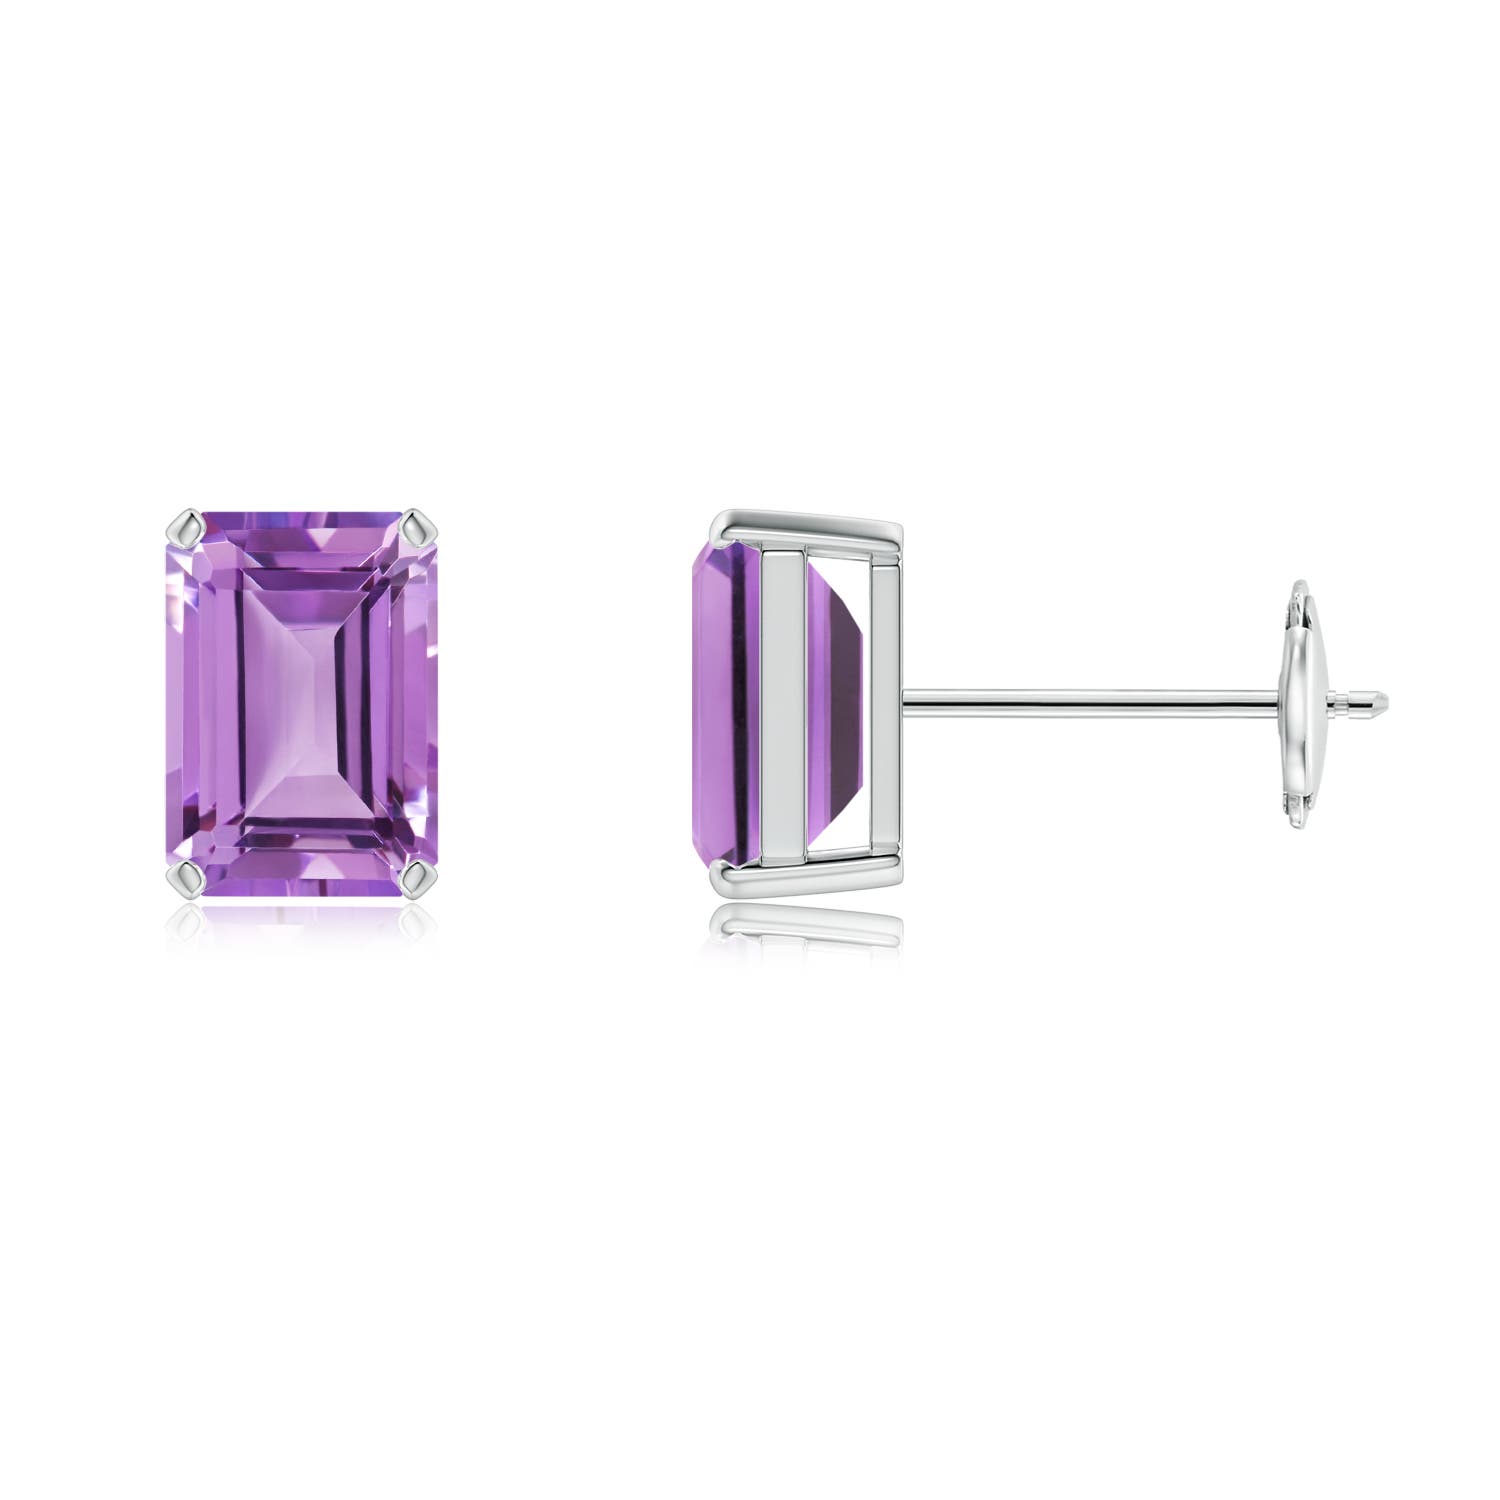 A - Amethyst / 1.8 CT / 14 KT White Gold